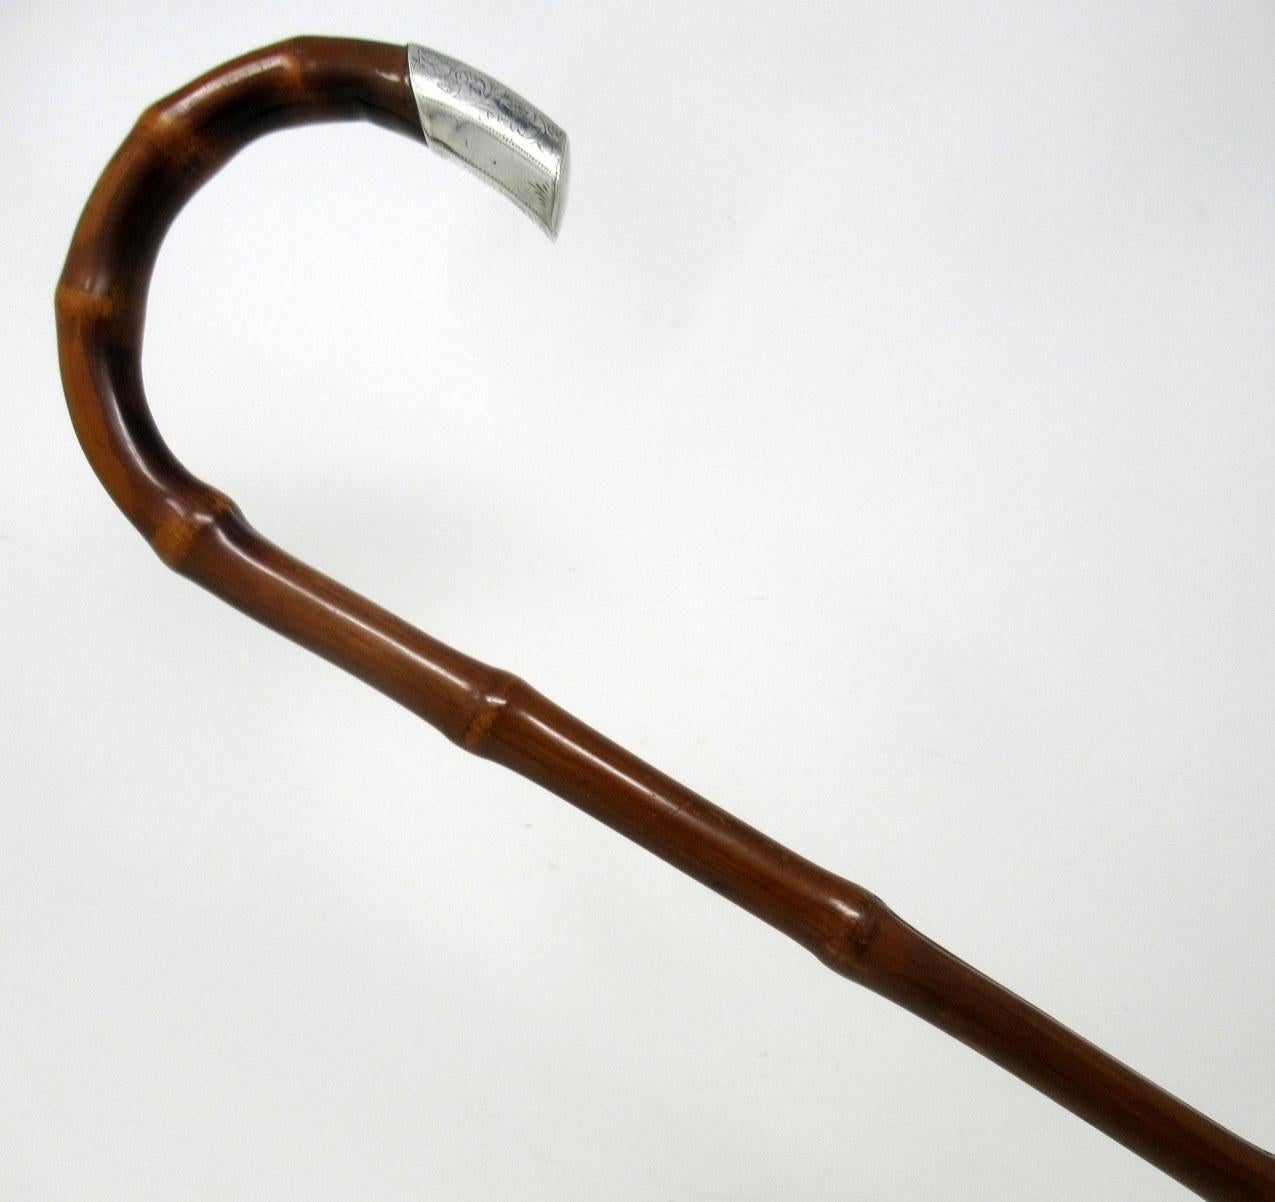 Edwardian Antique Bamboo Wooden Walking Stick Cane Sterling Silver Mount Crook Handle 1908